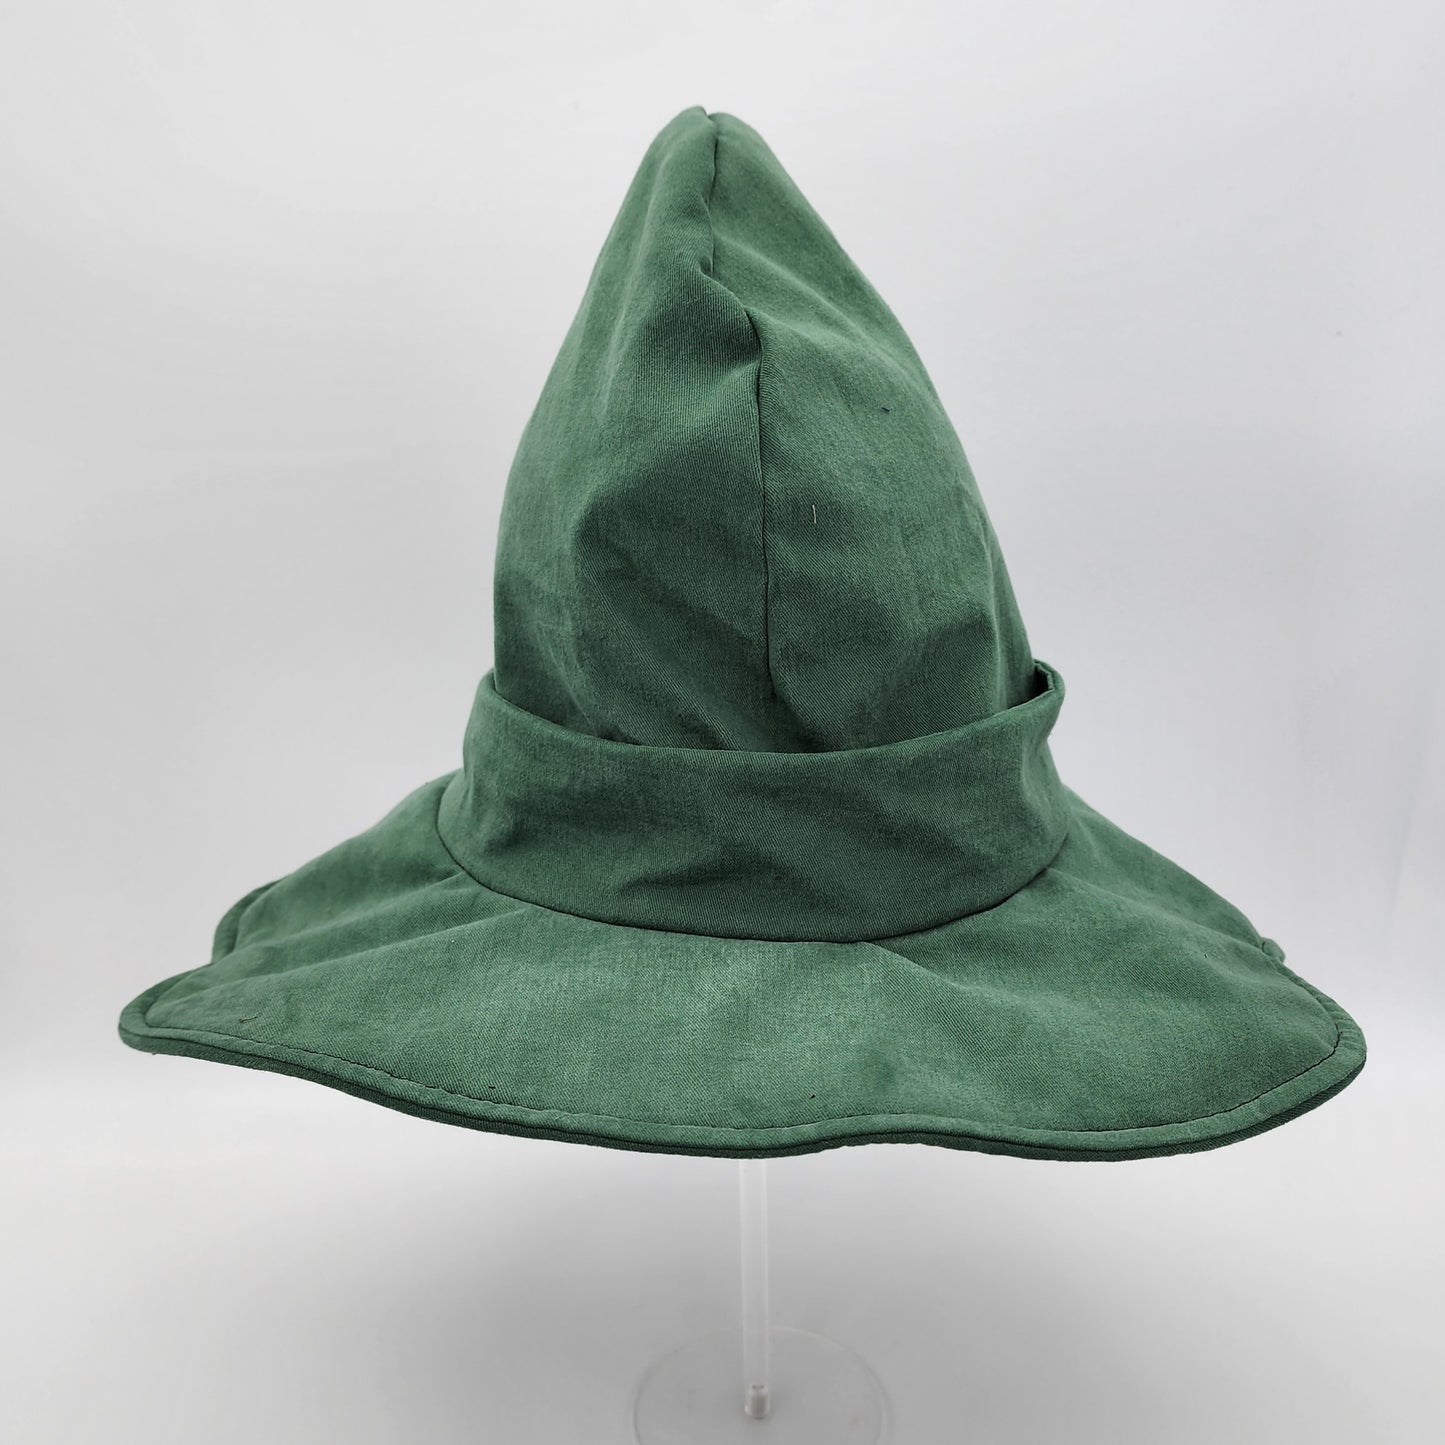 Butterfly Witch Hat- Emerald Green with Green and White Embroidery